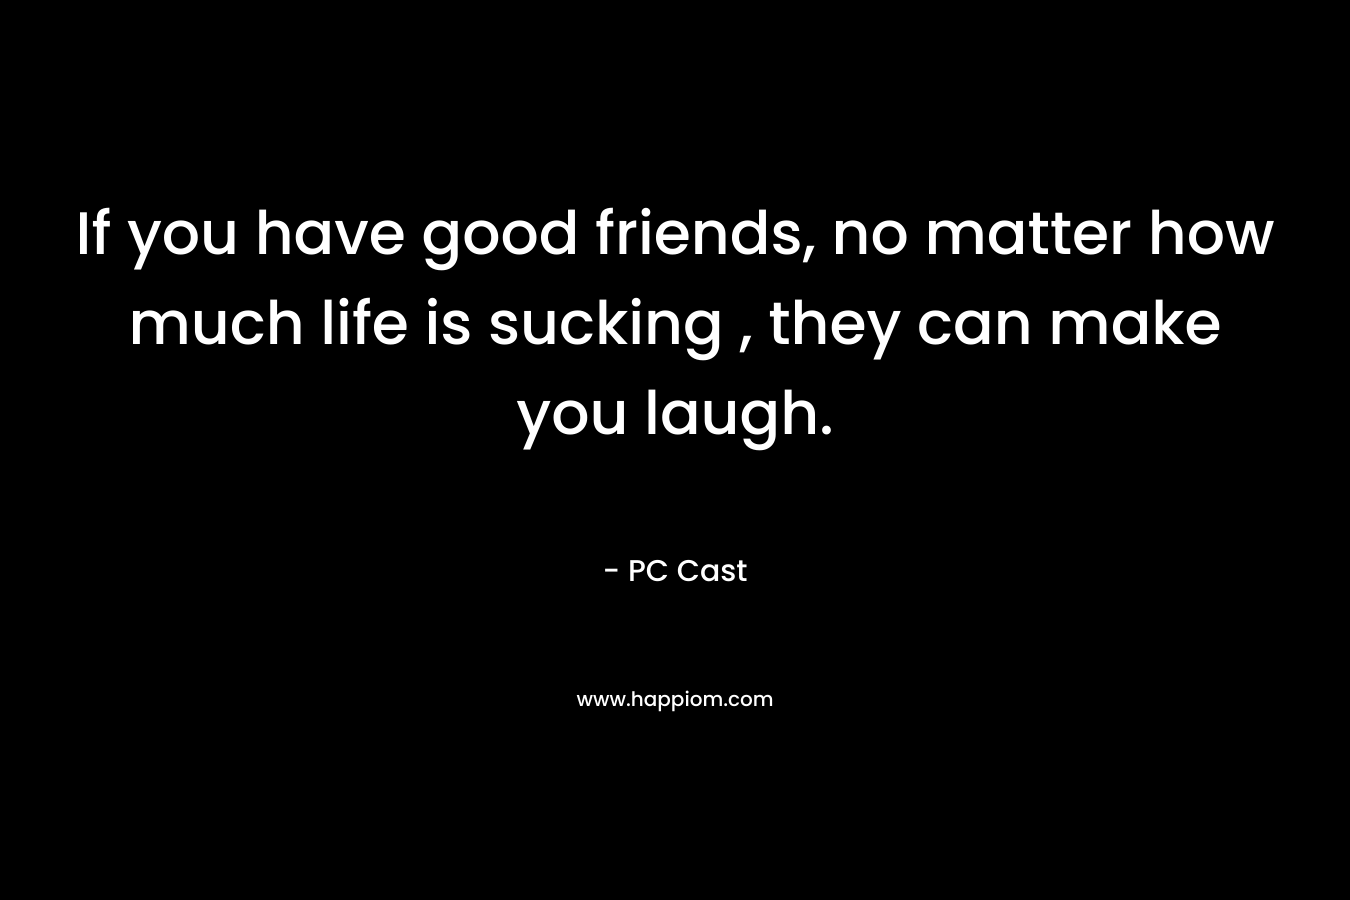 If you have good friends, no matter how much life is sucking , they can make you laugh.